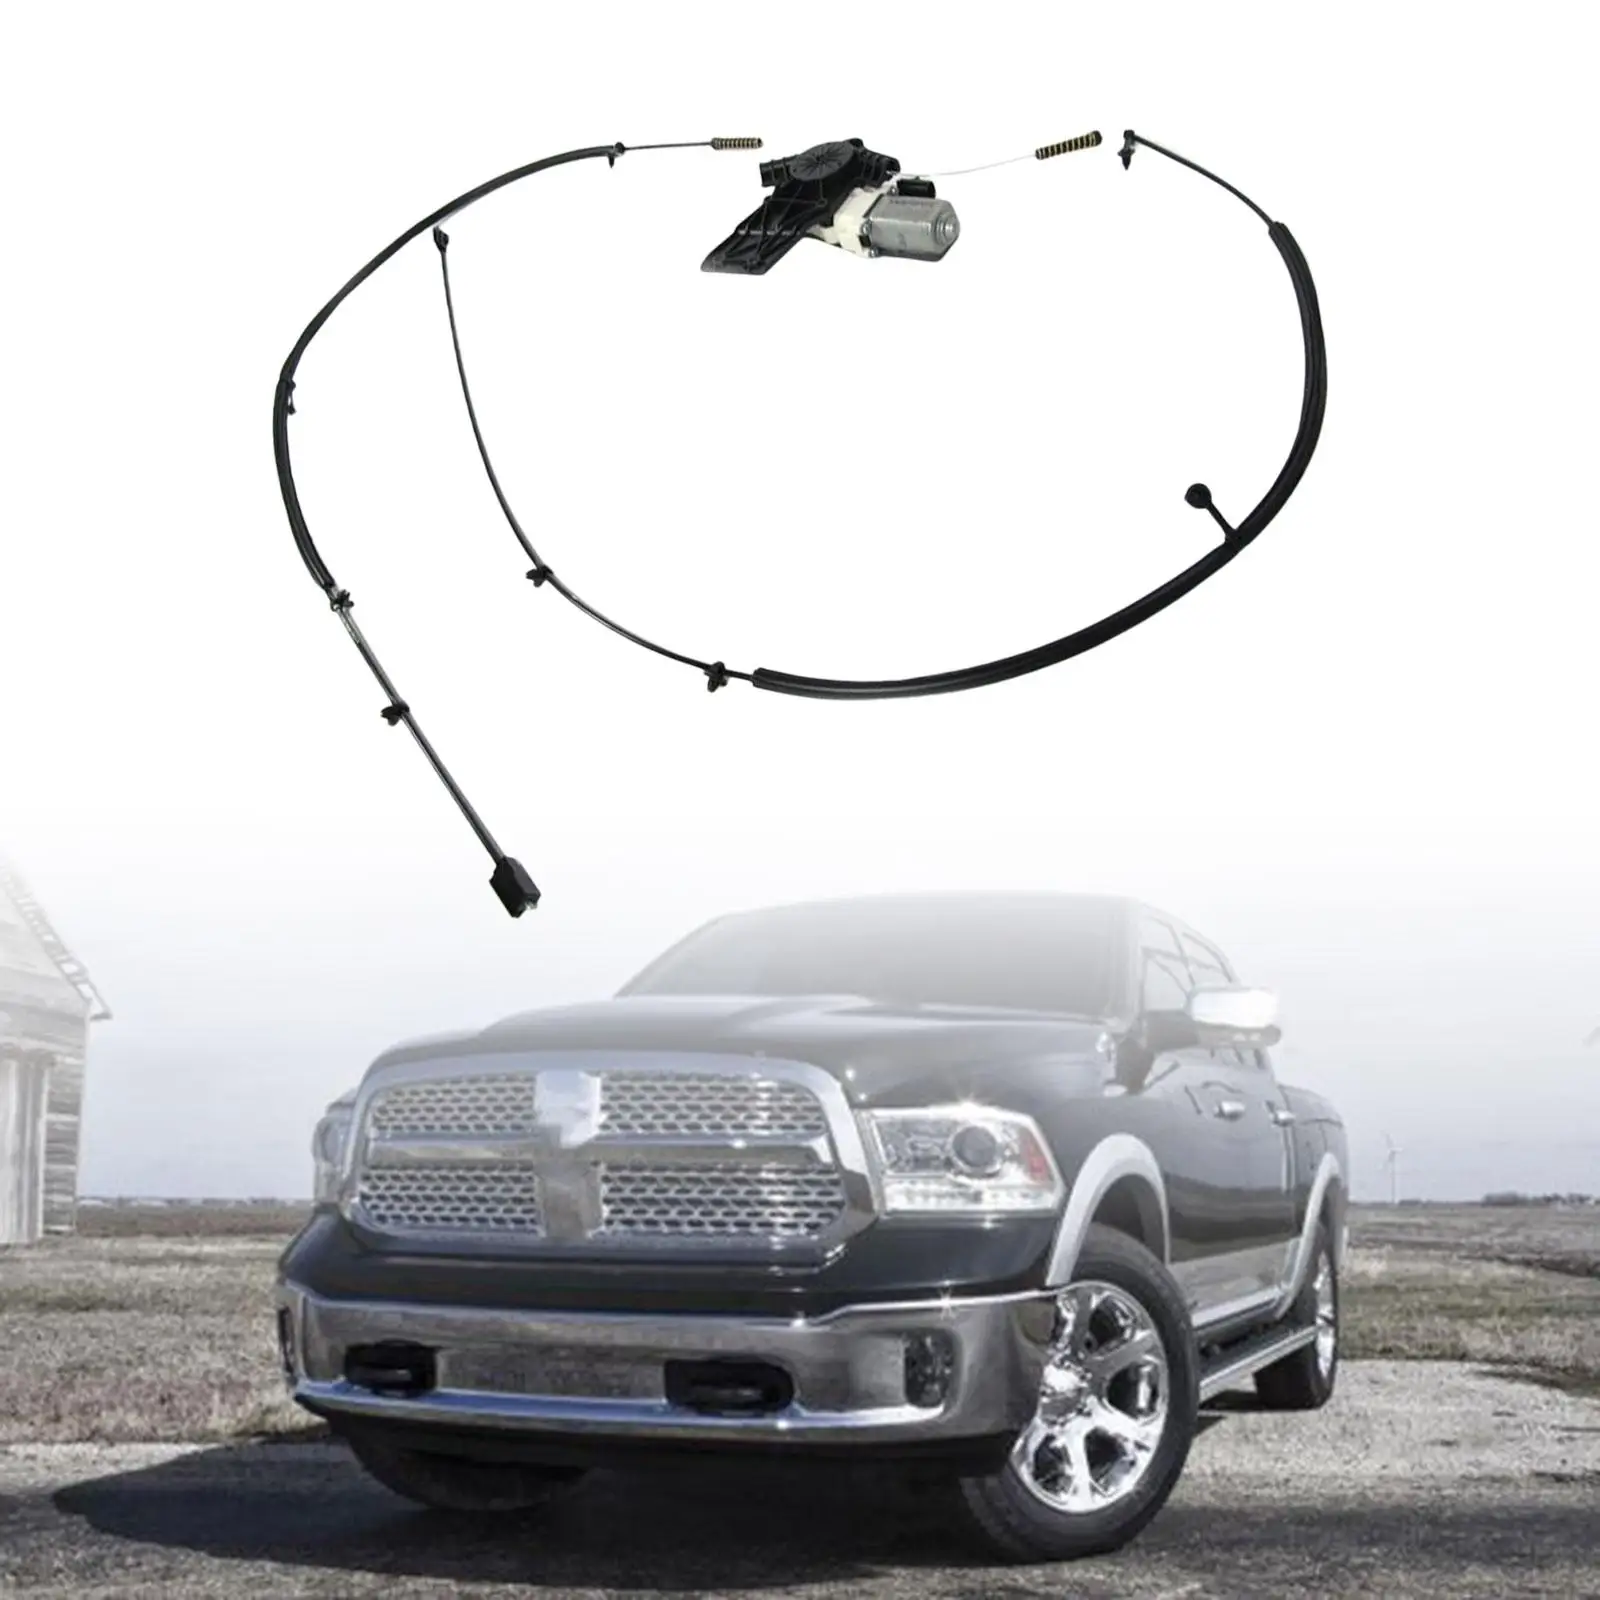 Rear Power Sliding Window Motor Cable Replace for Dodge RAM 1500 09-14